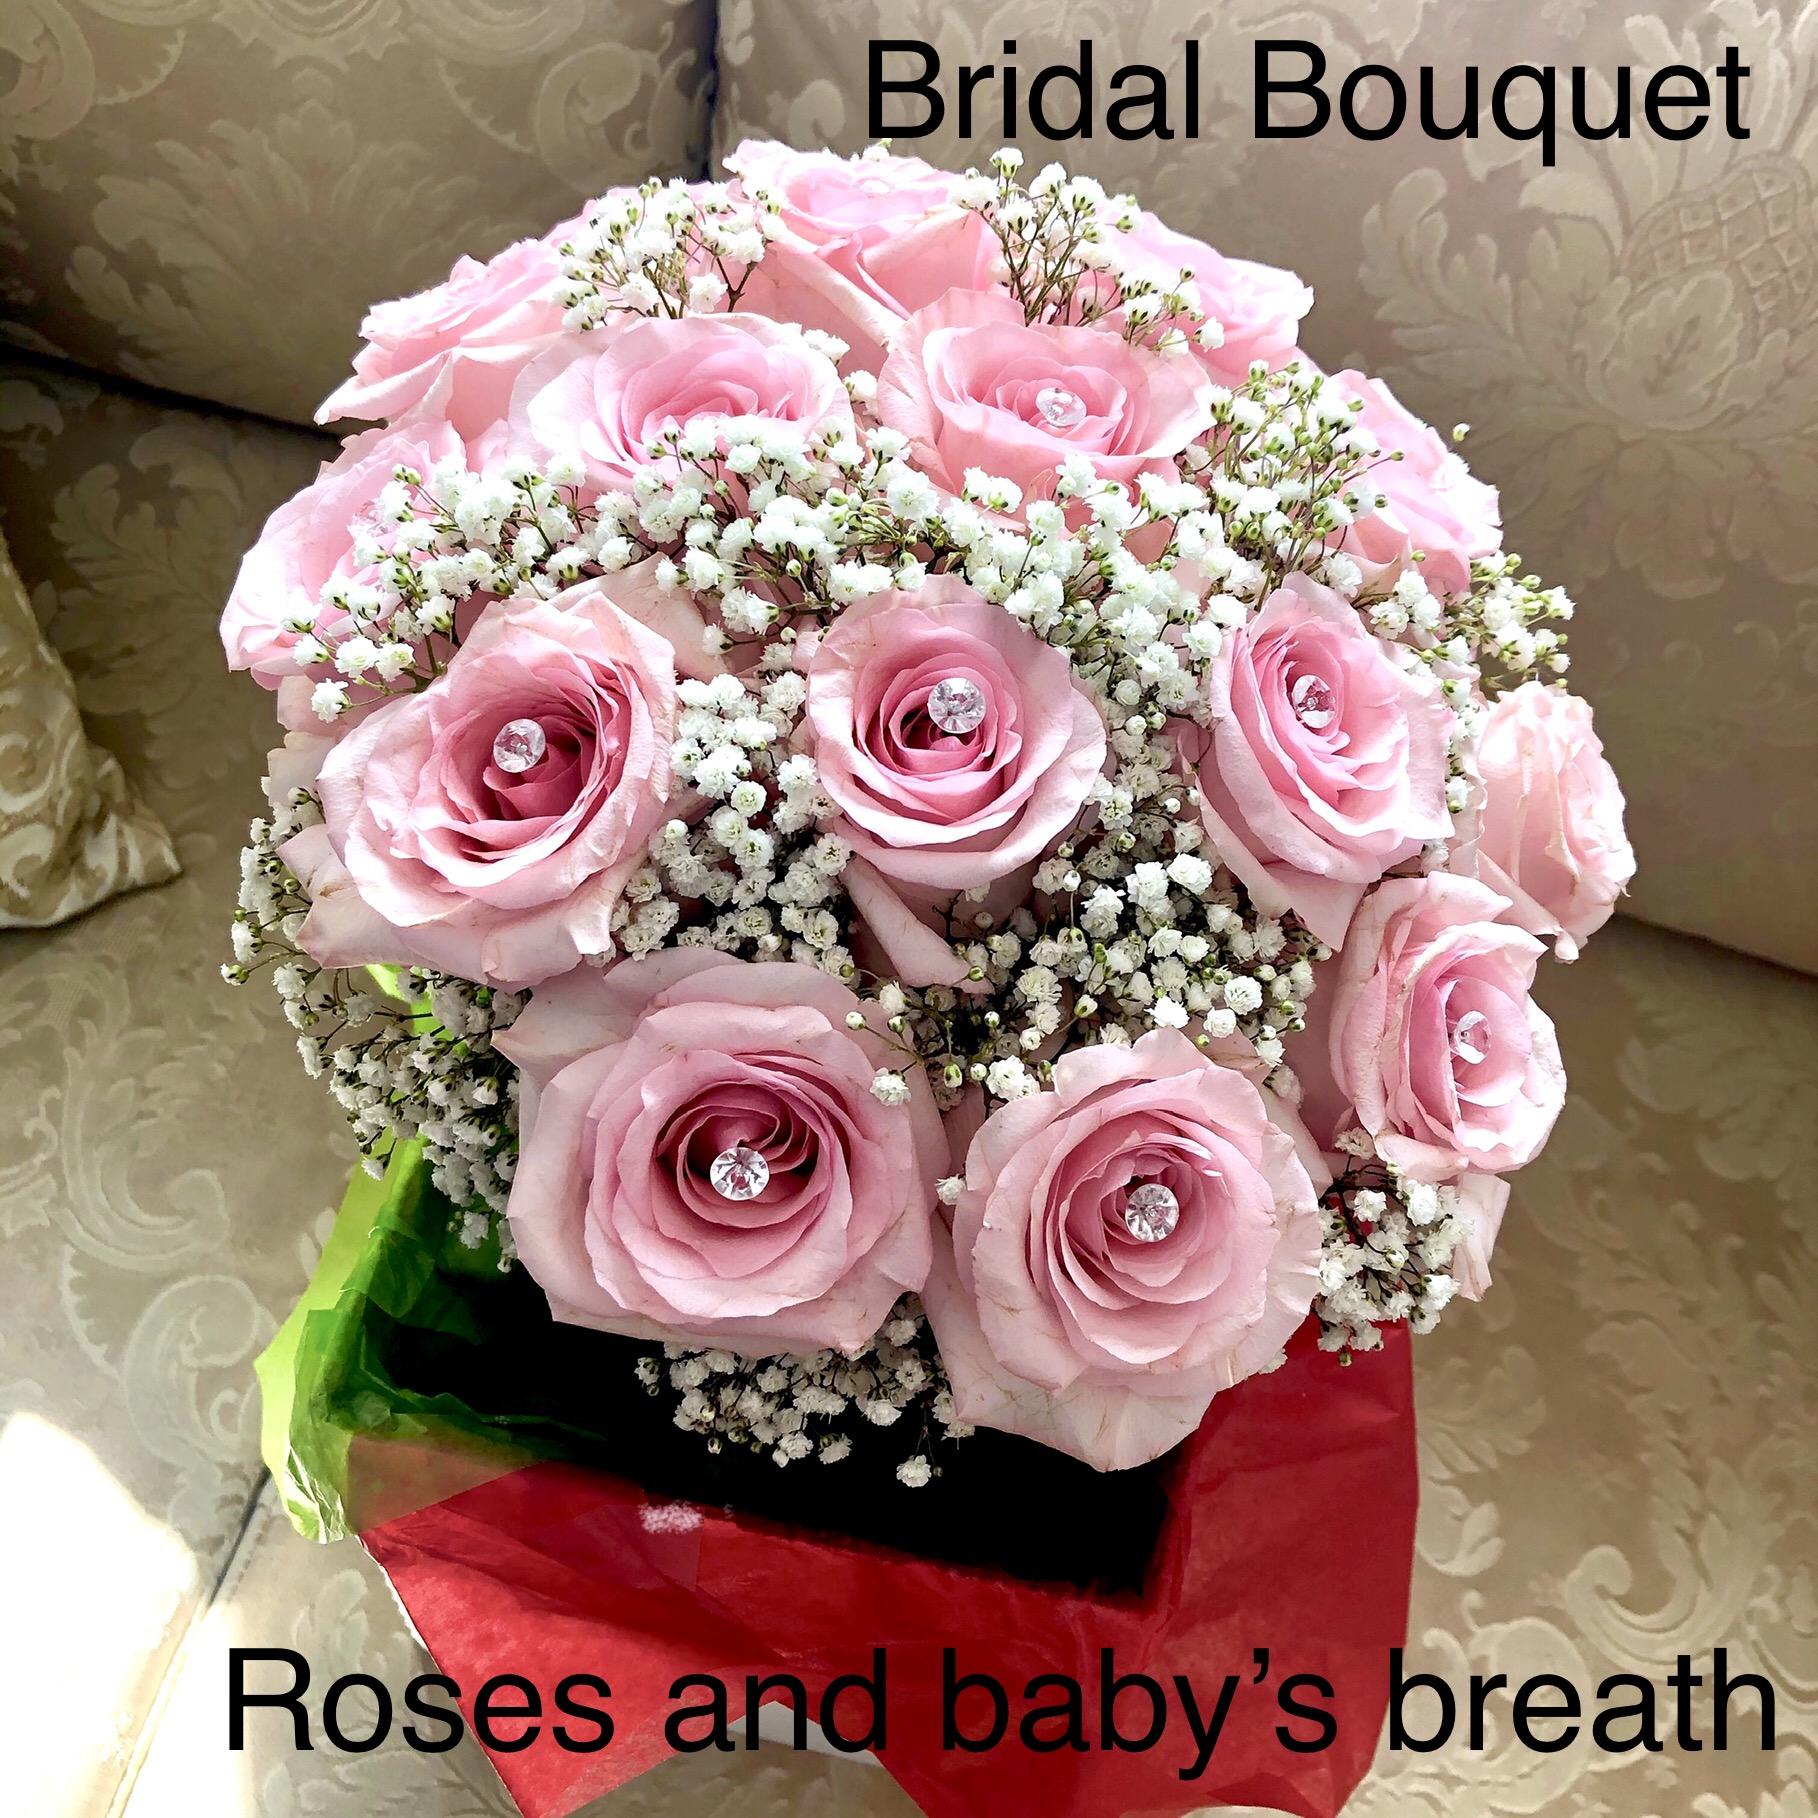 $120 Bridal Bouquet Roses and Babies Breath 